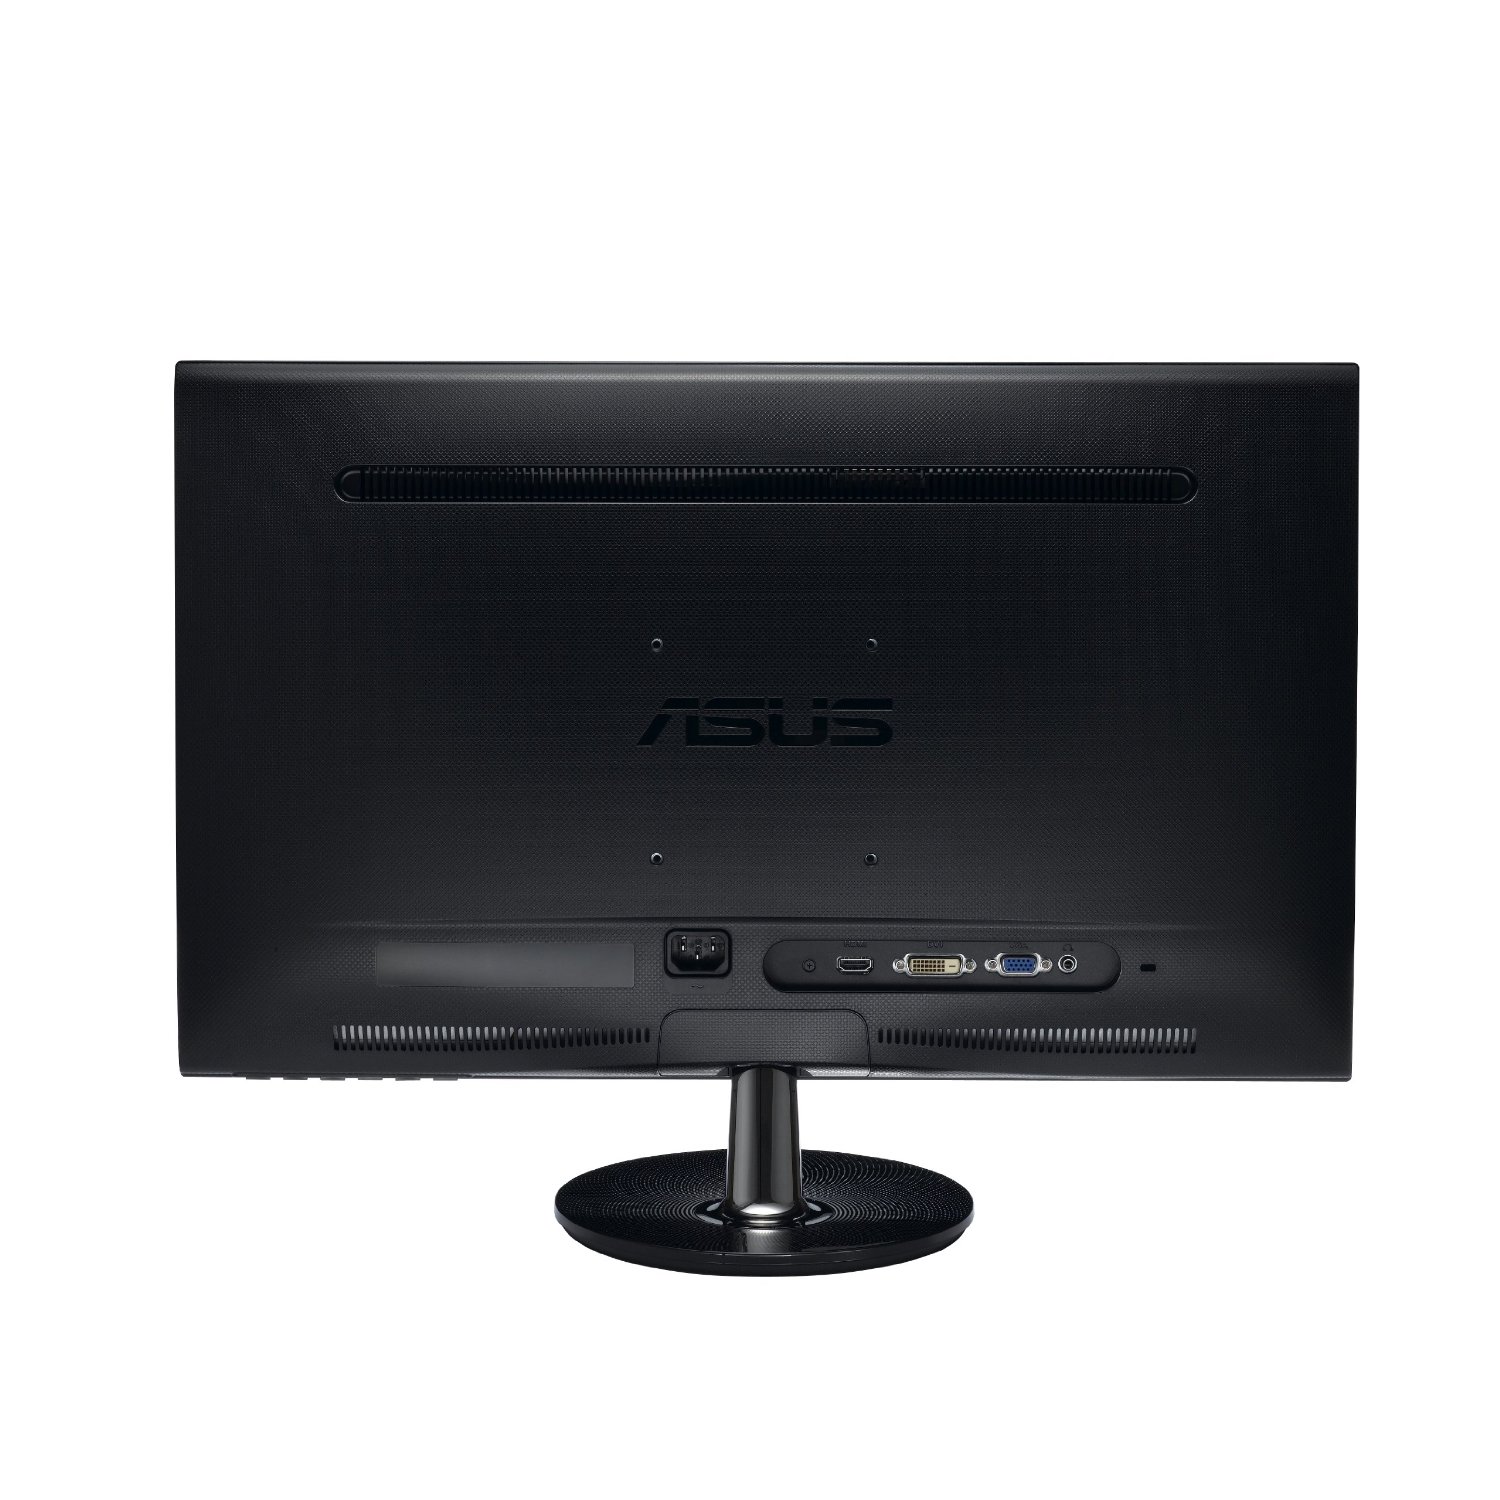 http://thetechjournal.com/wp-content/uploads/images/1206/1340551232-asus-vs248hp-24inch-fullhd-led-monitor-6.jpg